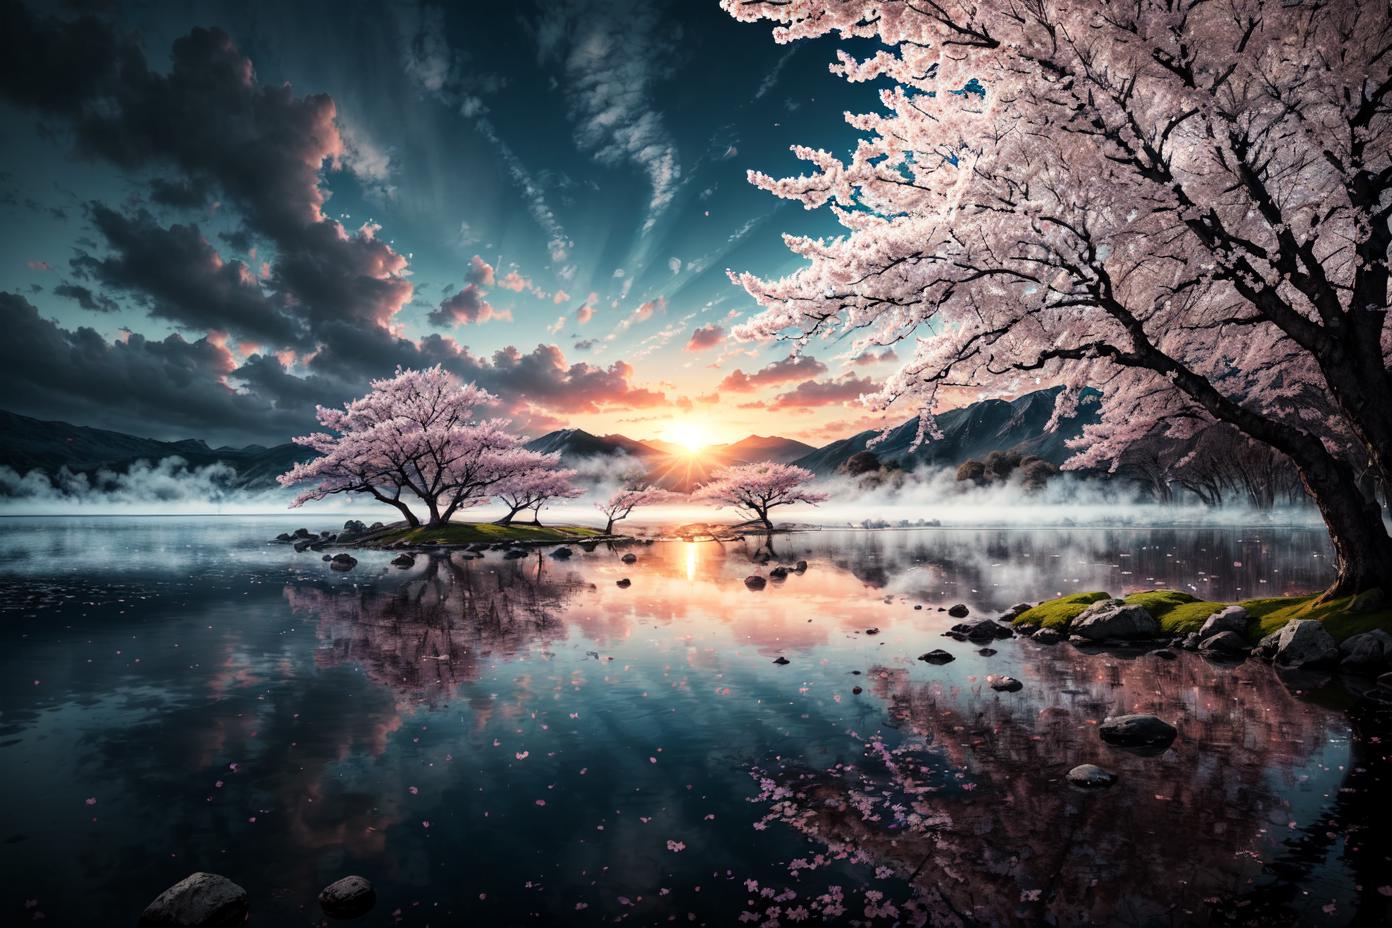 A serene scene of a lake with blooming cherry blossoms and mountains in the background.